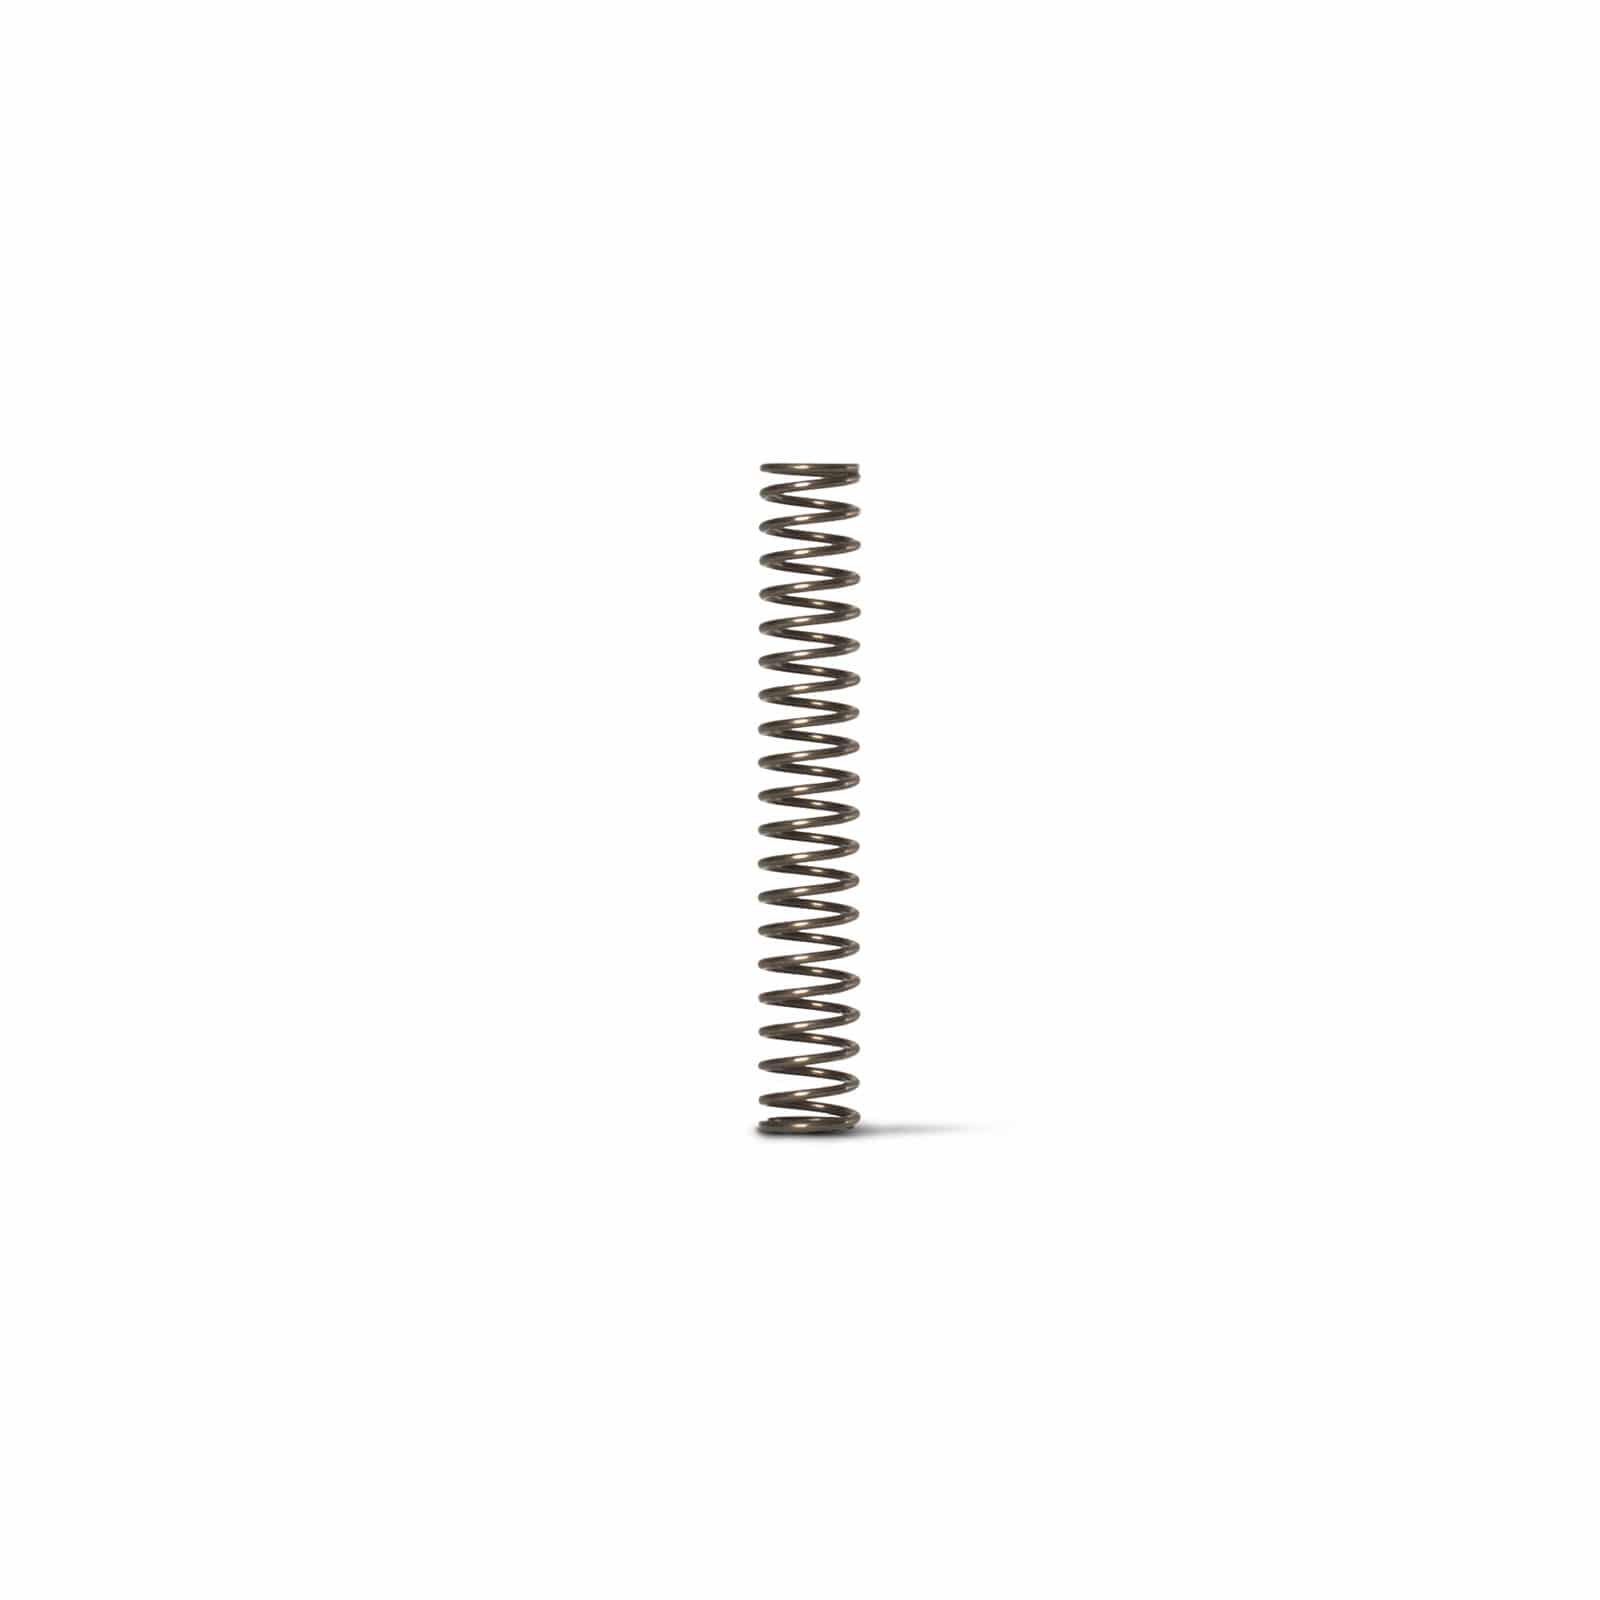 Horizontal image of 65mm air rifle compression spring